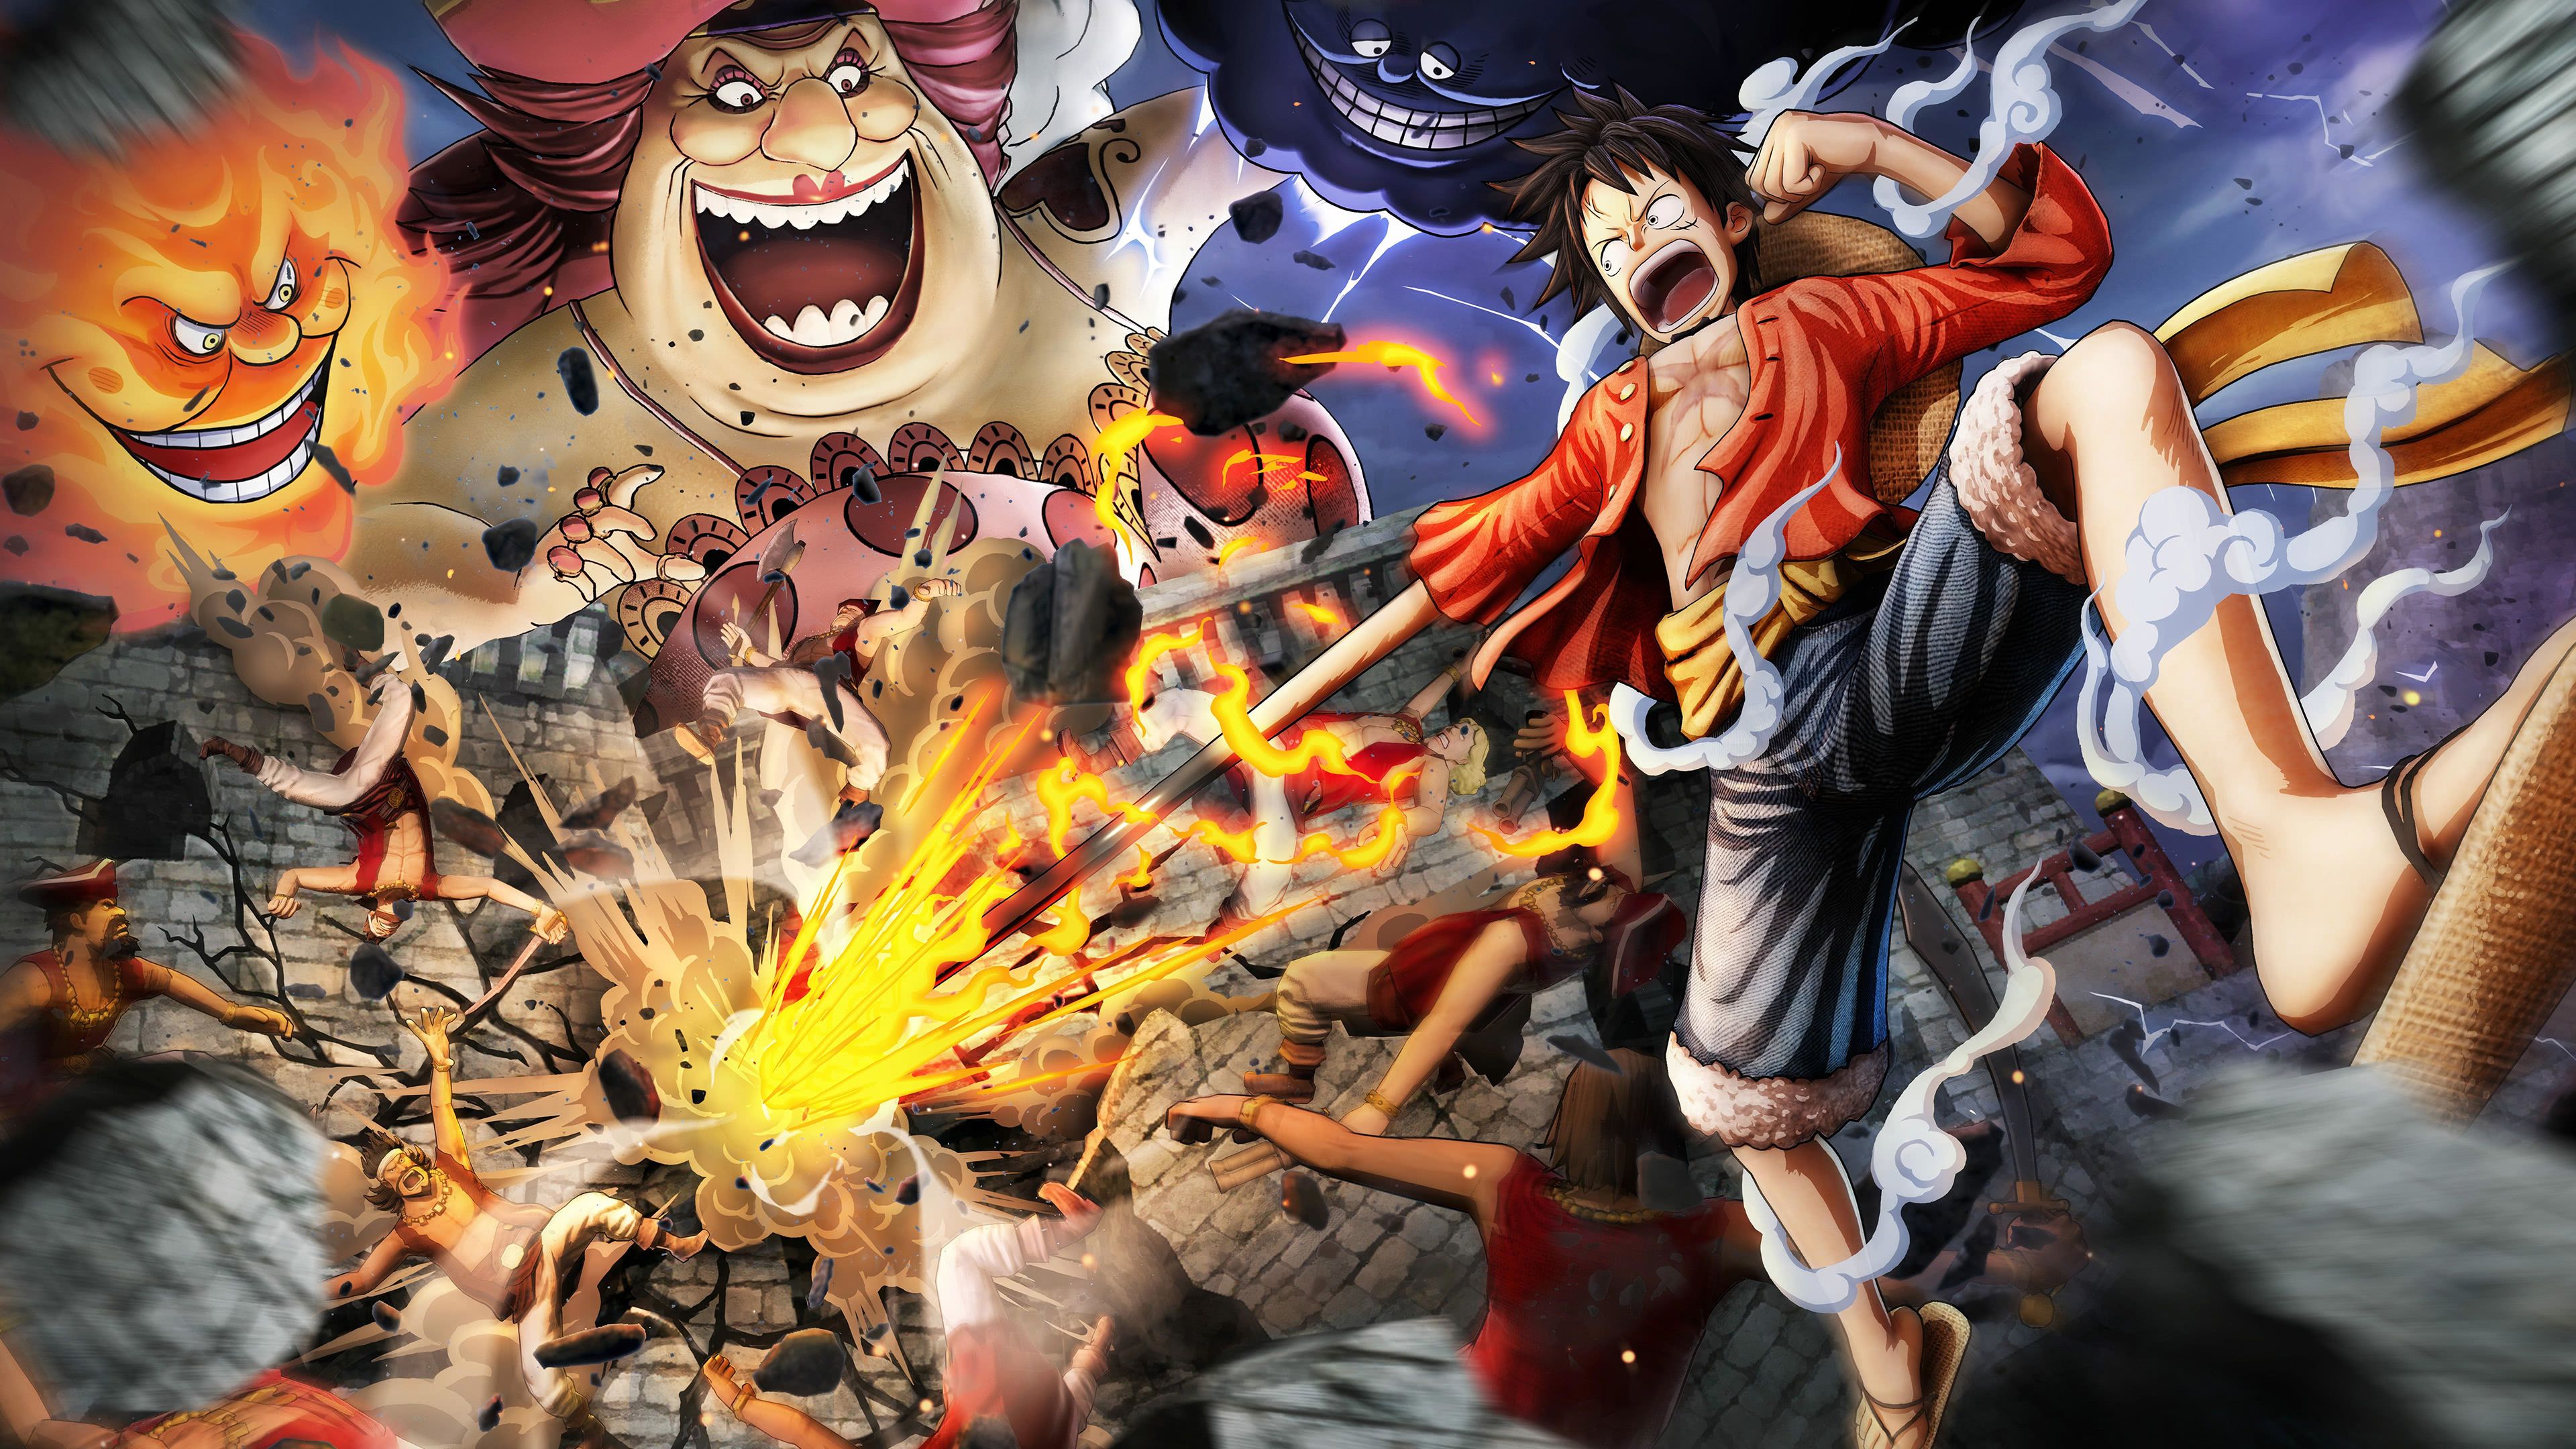 4K Best One Piece Wallpapers for you Laptop , Desktop .#OnePieceWallpapers  #4KAnimeArt 